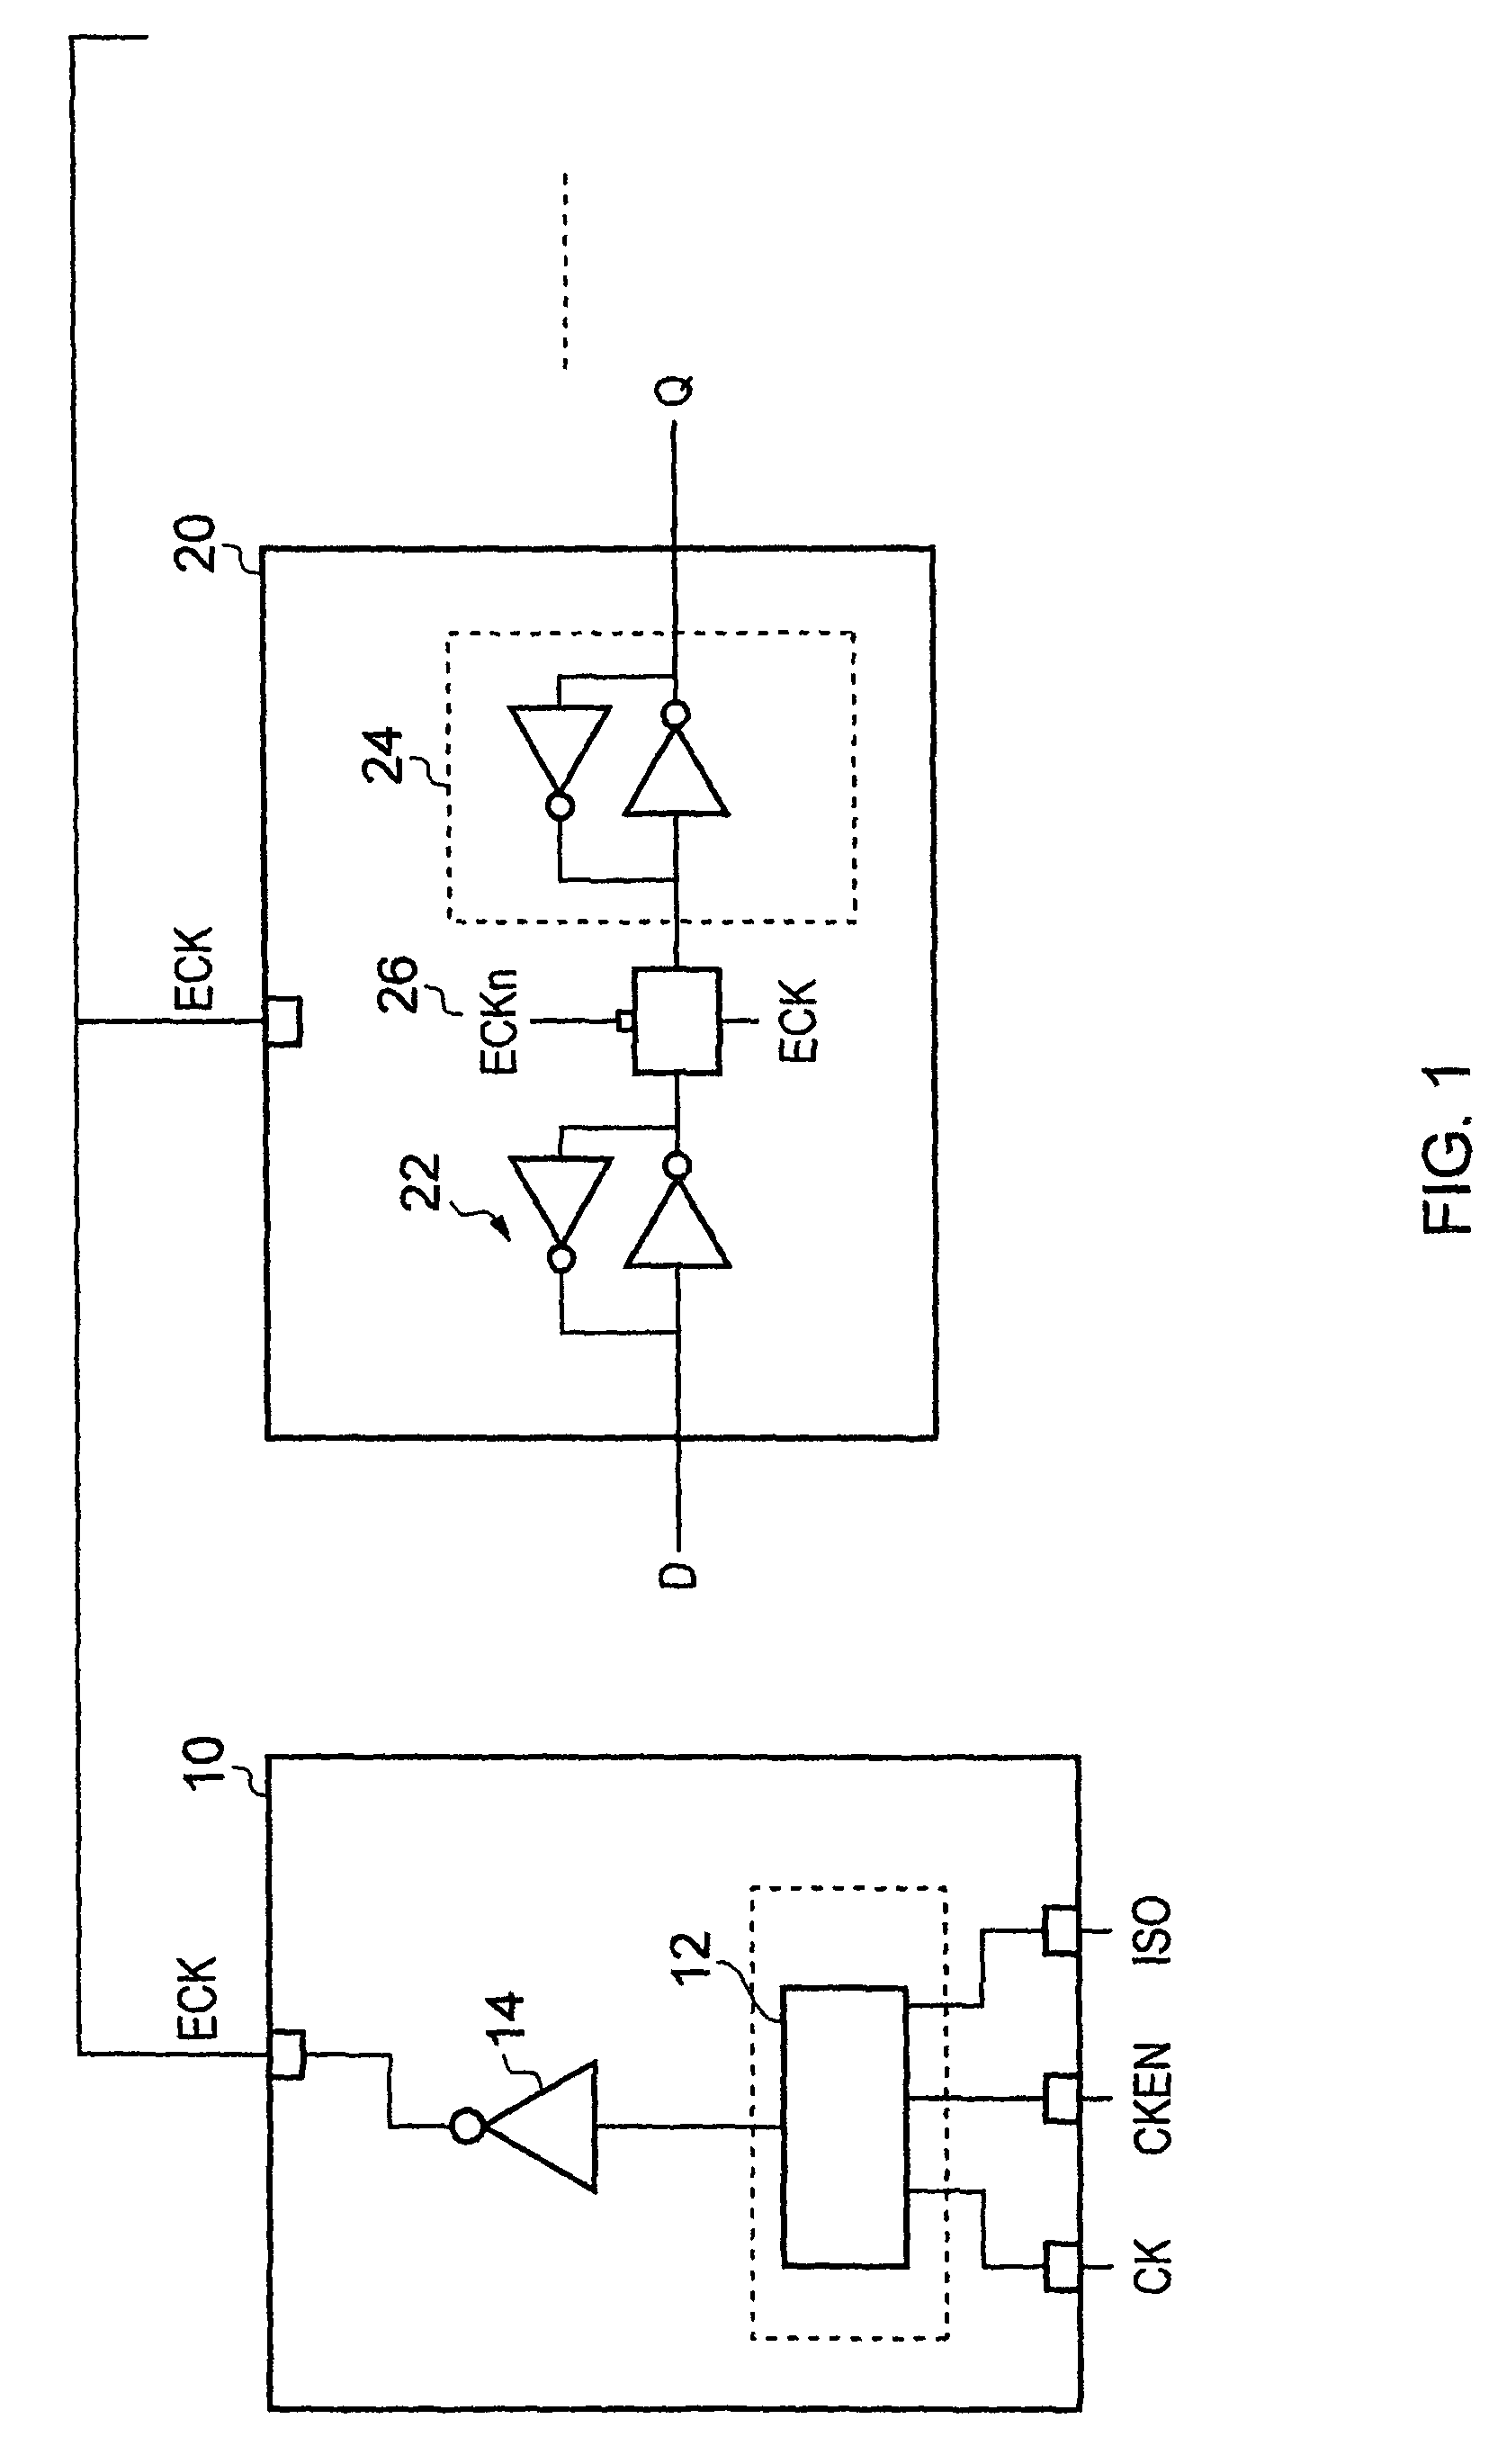 Supplying a clock signal and a gated clock signal to synchronous elements